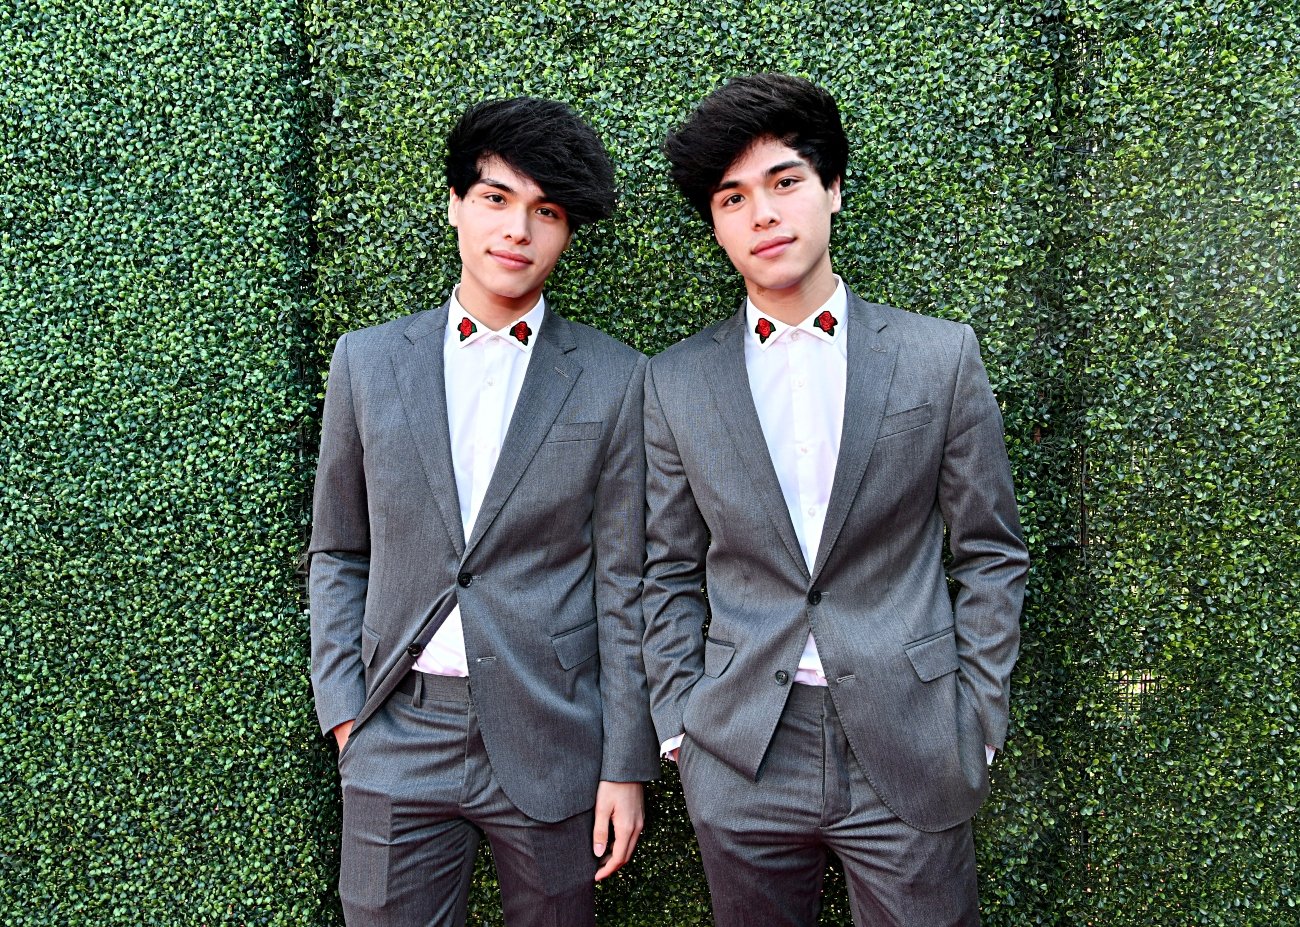 TikTok Stars ‘The Stokes Twins’ Are Facing Felony Charges